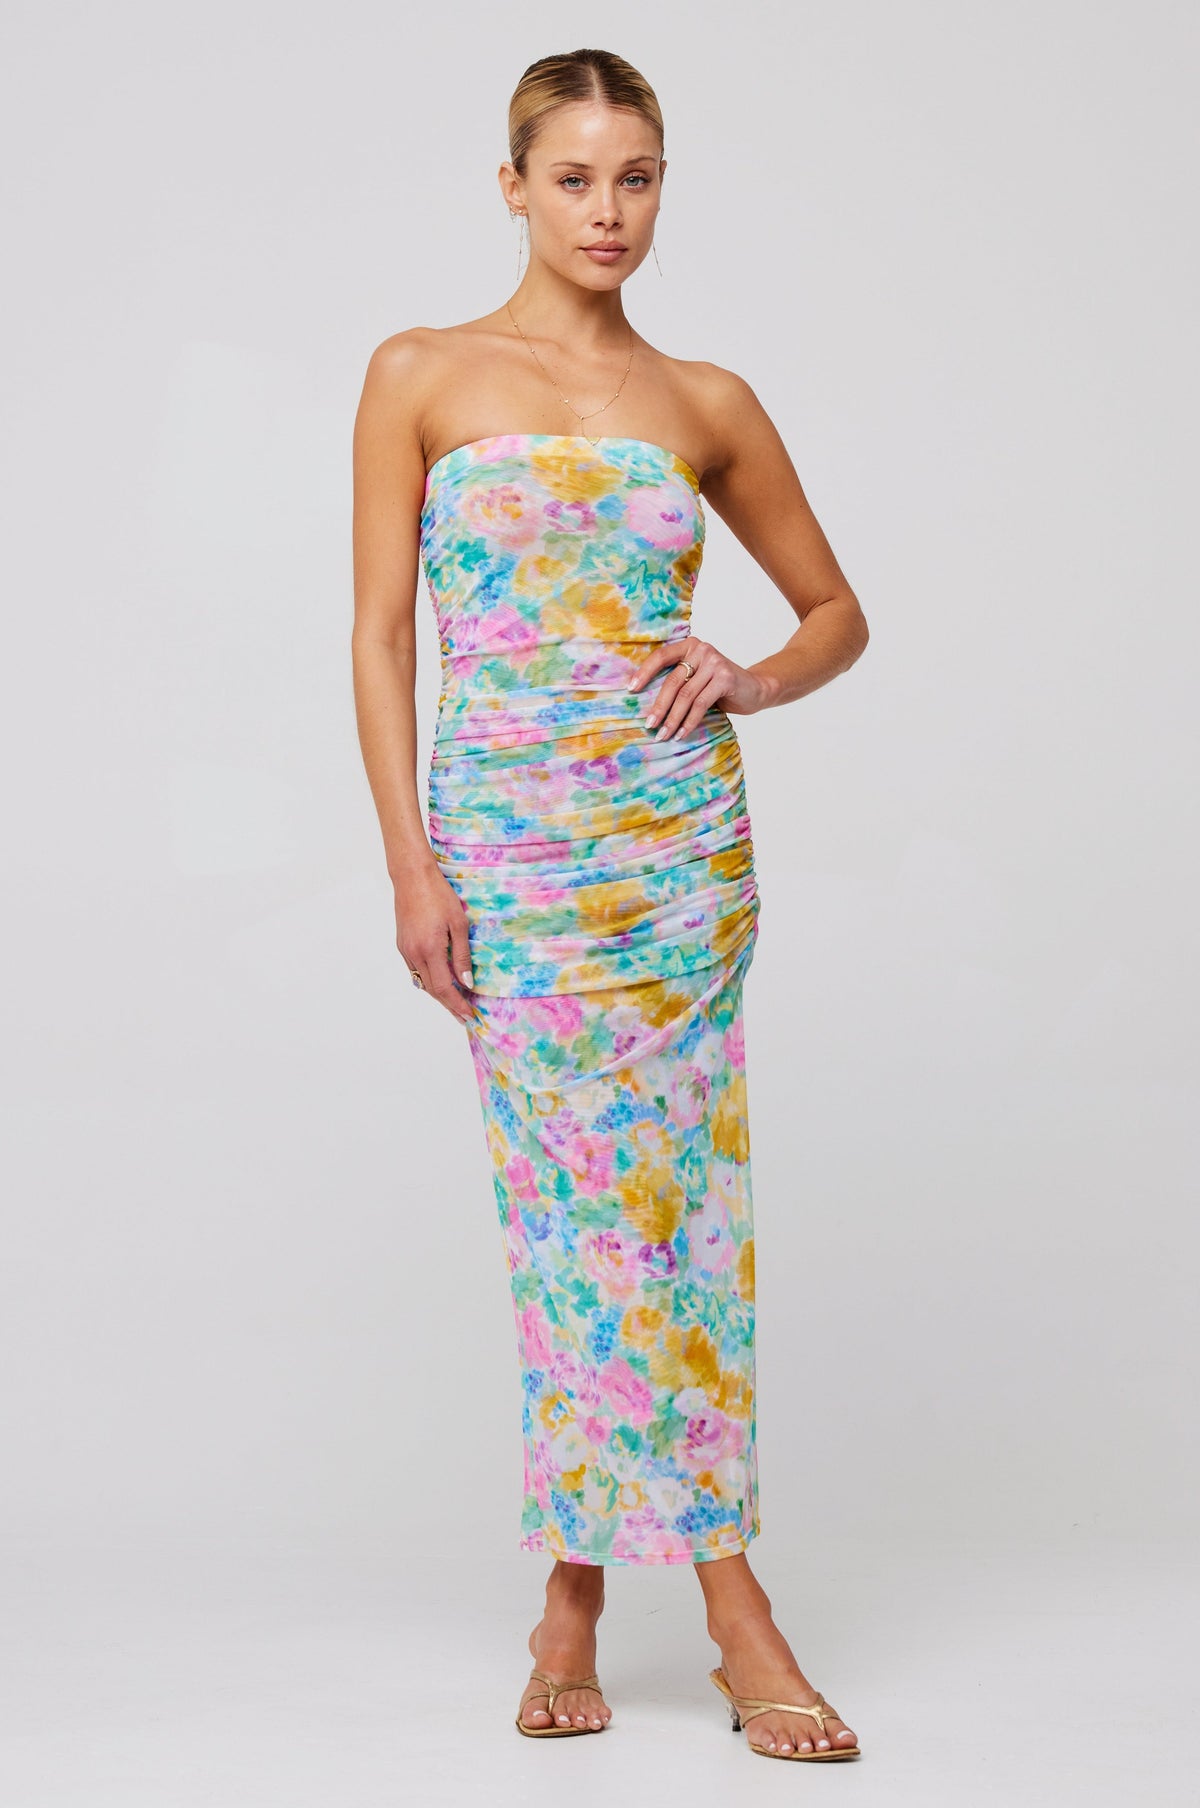 This is an image of Kristina Mesh Midi in Canvas - RESA featuring a model wearing the dress